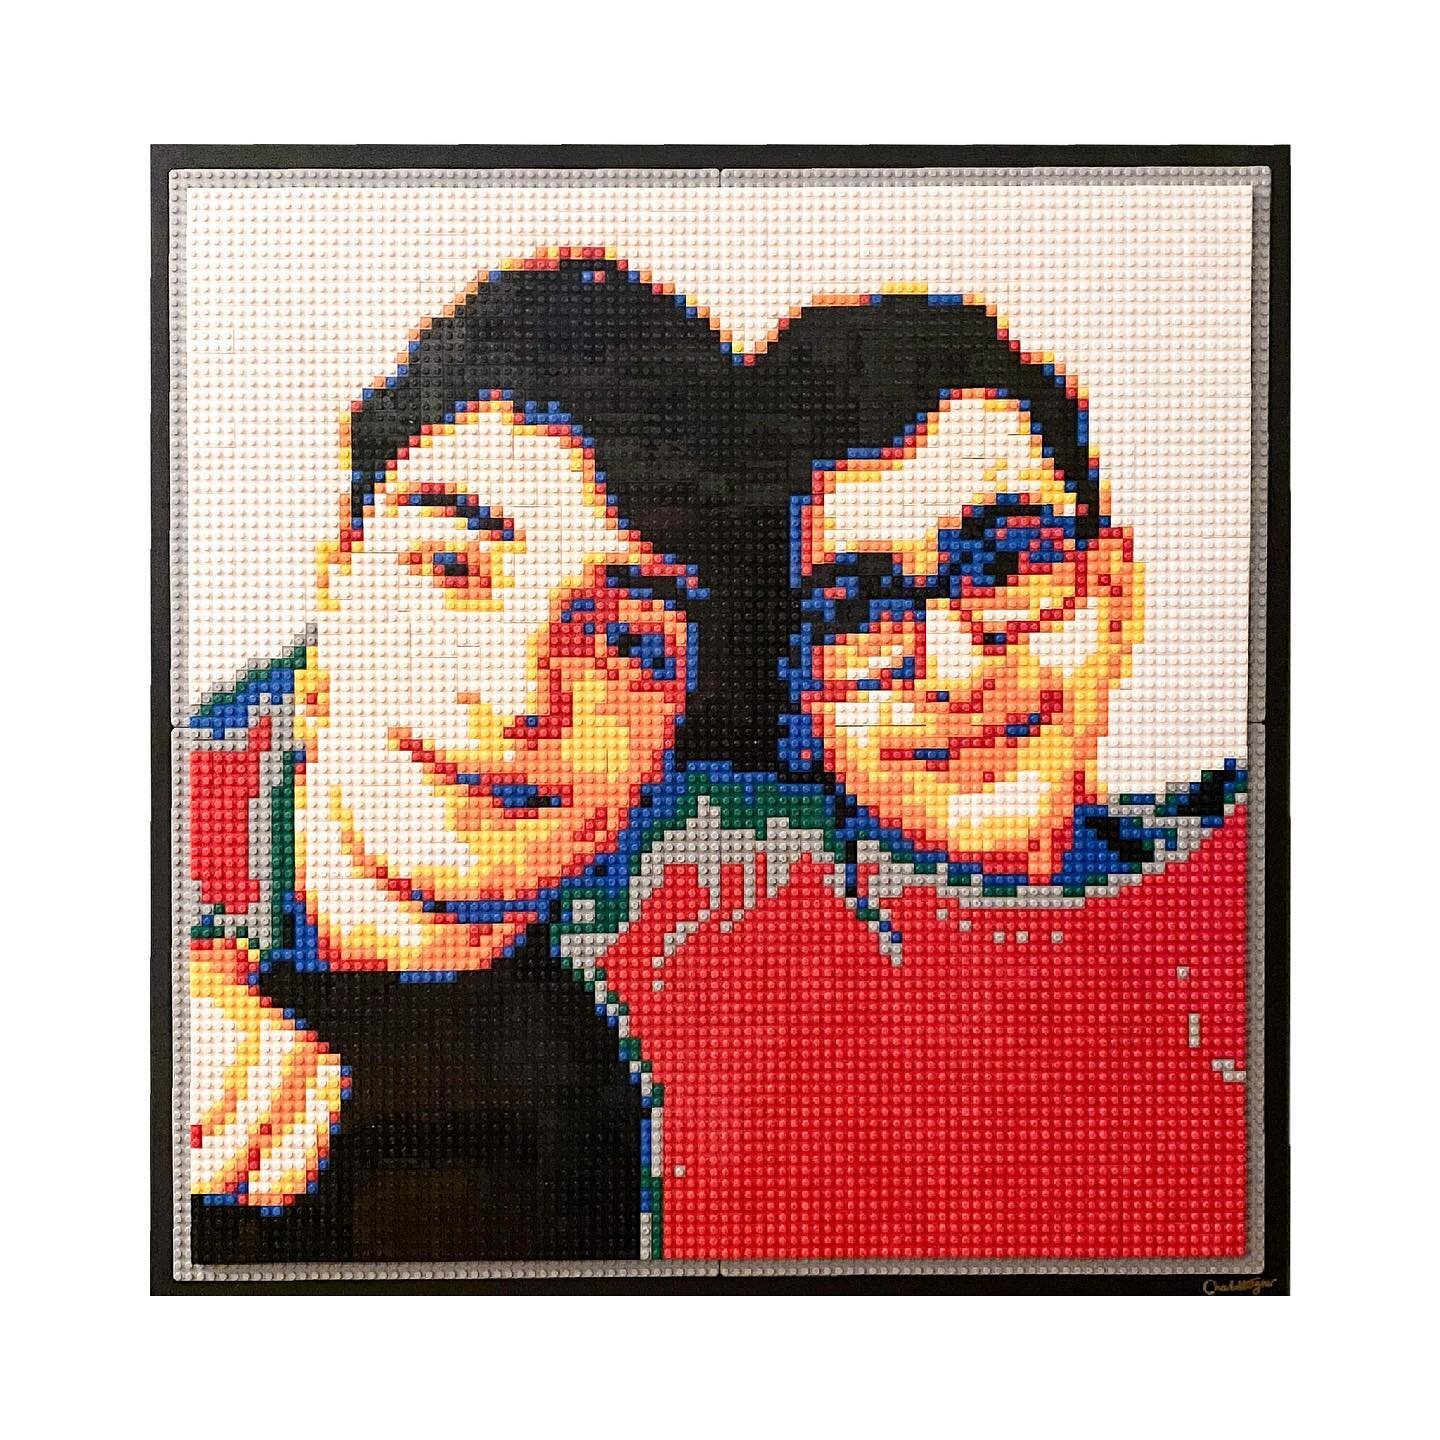 Commission piece of two brothers 👬 
This piece is now located in Hertfordshire 🙌🏼 
I feel so blessed to be able to create these portraits for people 💖

#family #love #friends #happy #instagood #life #photography #fun #brothers #lego #legoart #sib